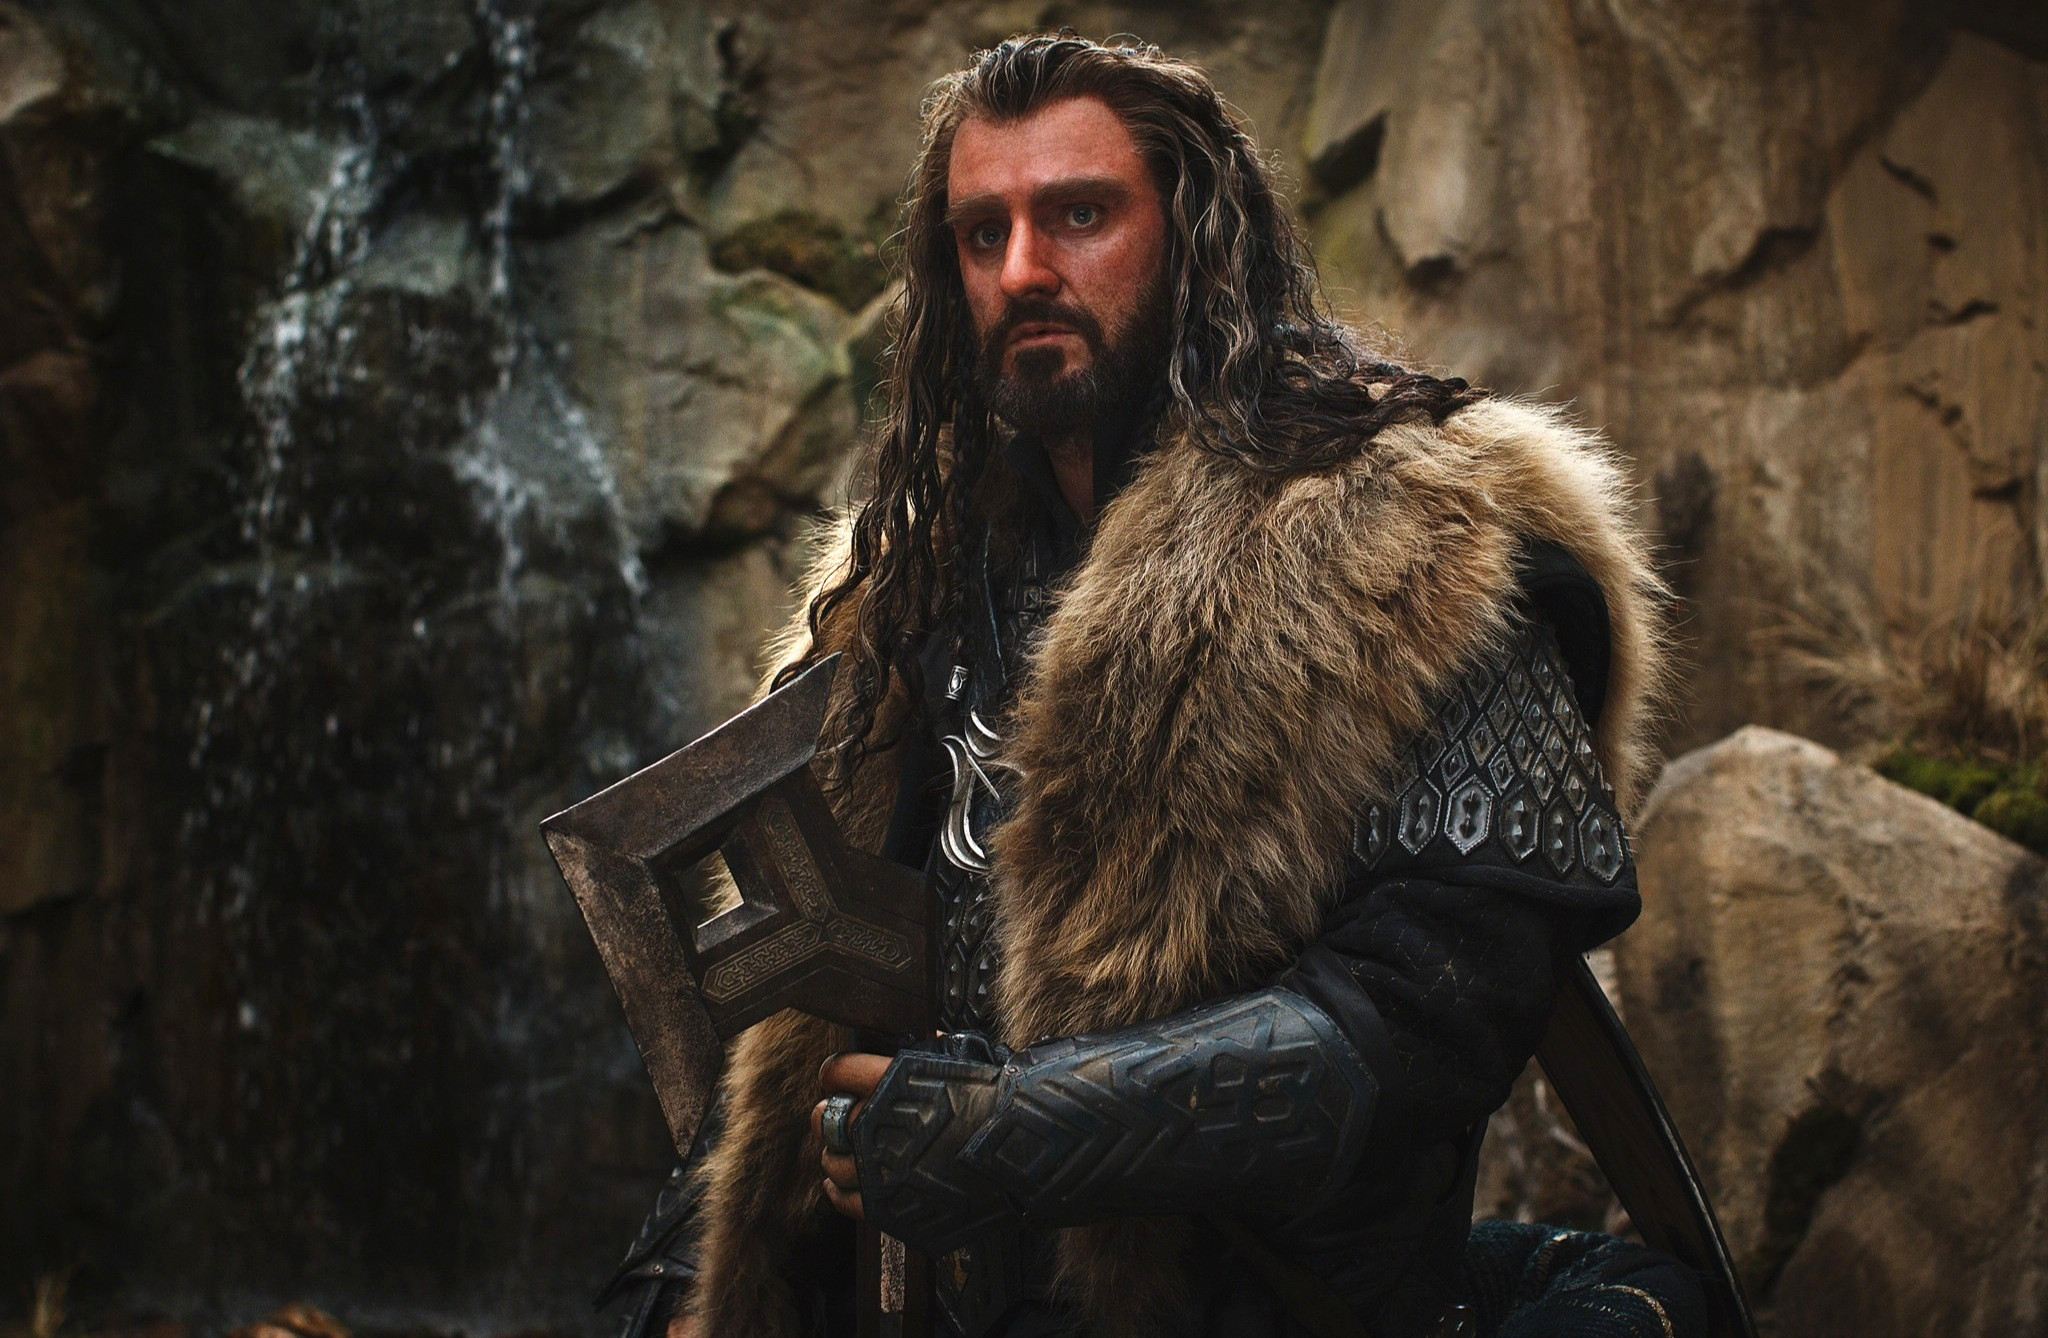 2048x1338 Gallery For > The Hobbit Wallpaper Hd Thorin